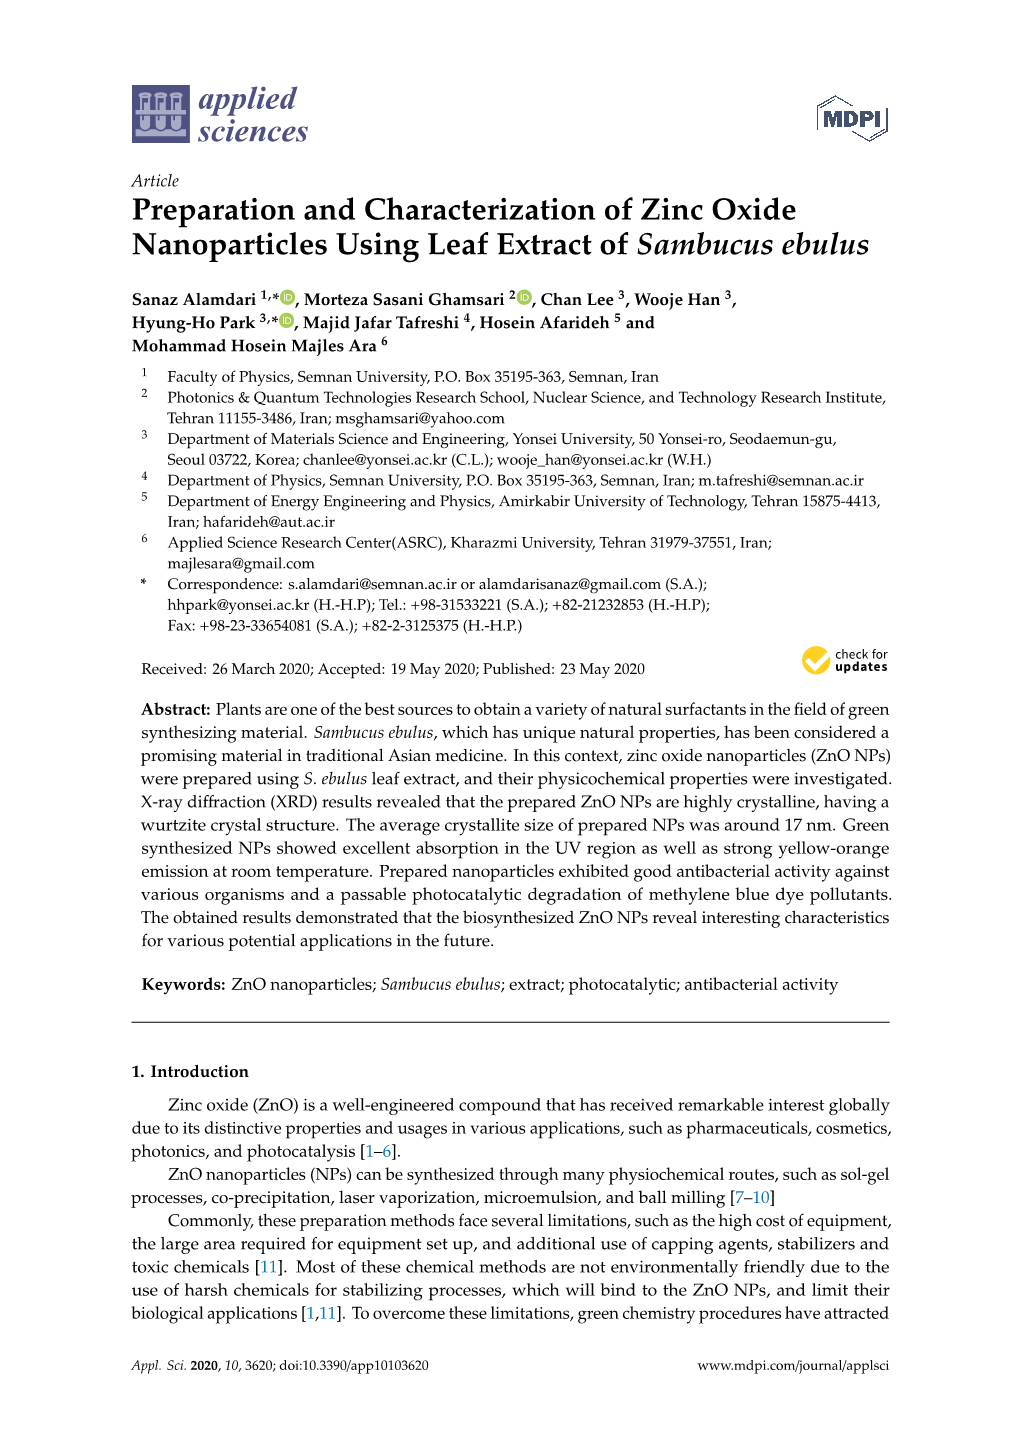 Preparation and Characterization of Zinc Oxide Nanoparticles Using Leaf Extract of Sambucus Ebulus